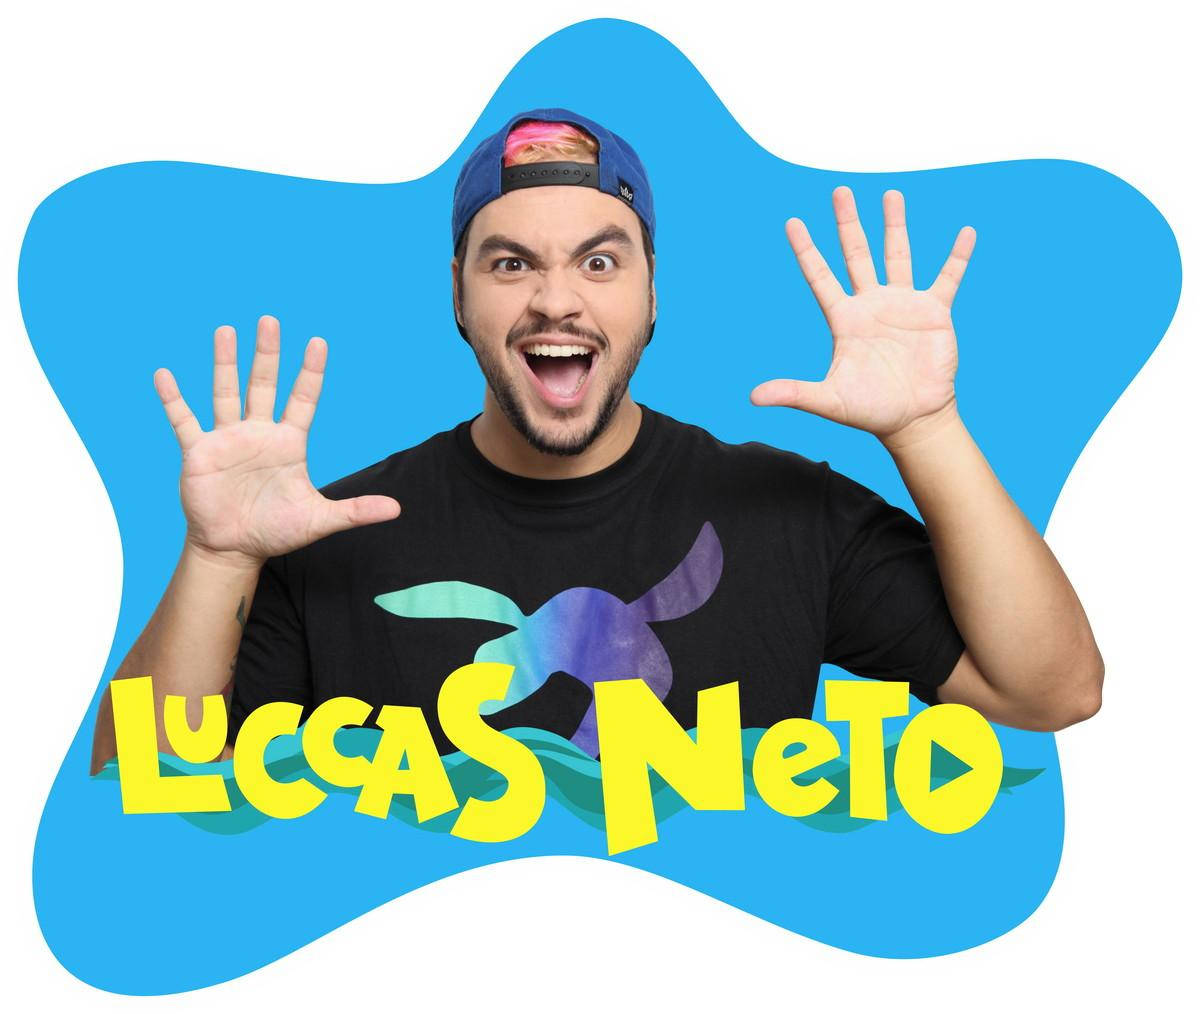 Luccas neto HD wallpapers